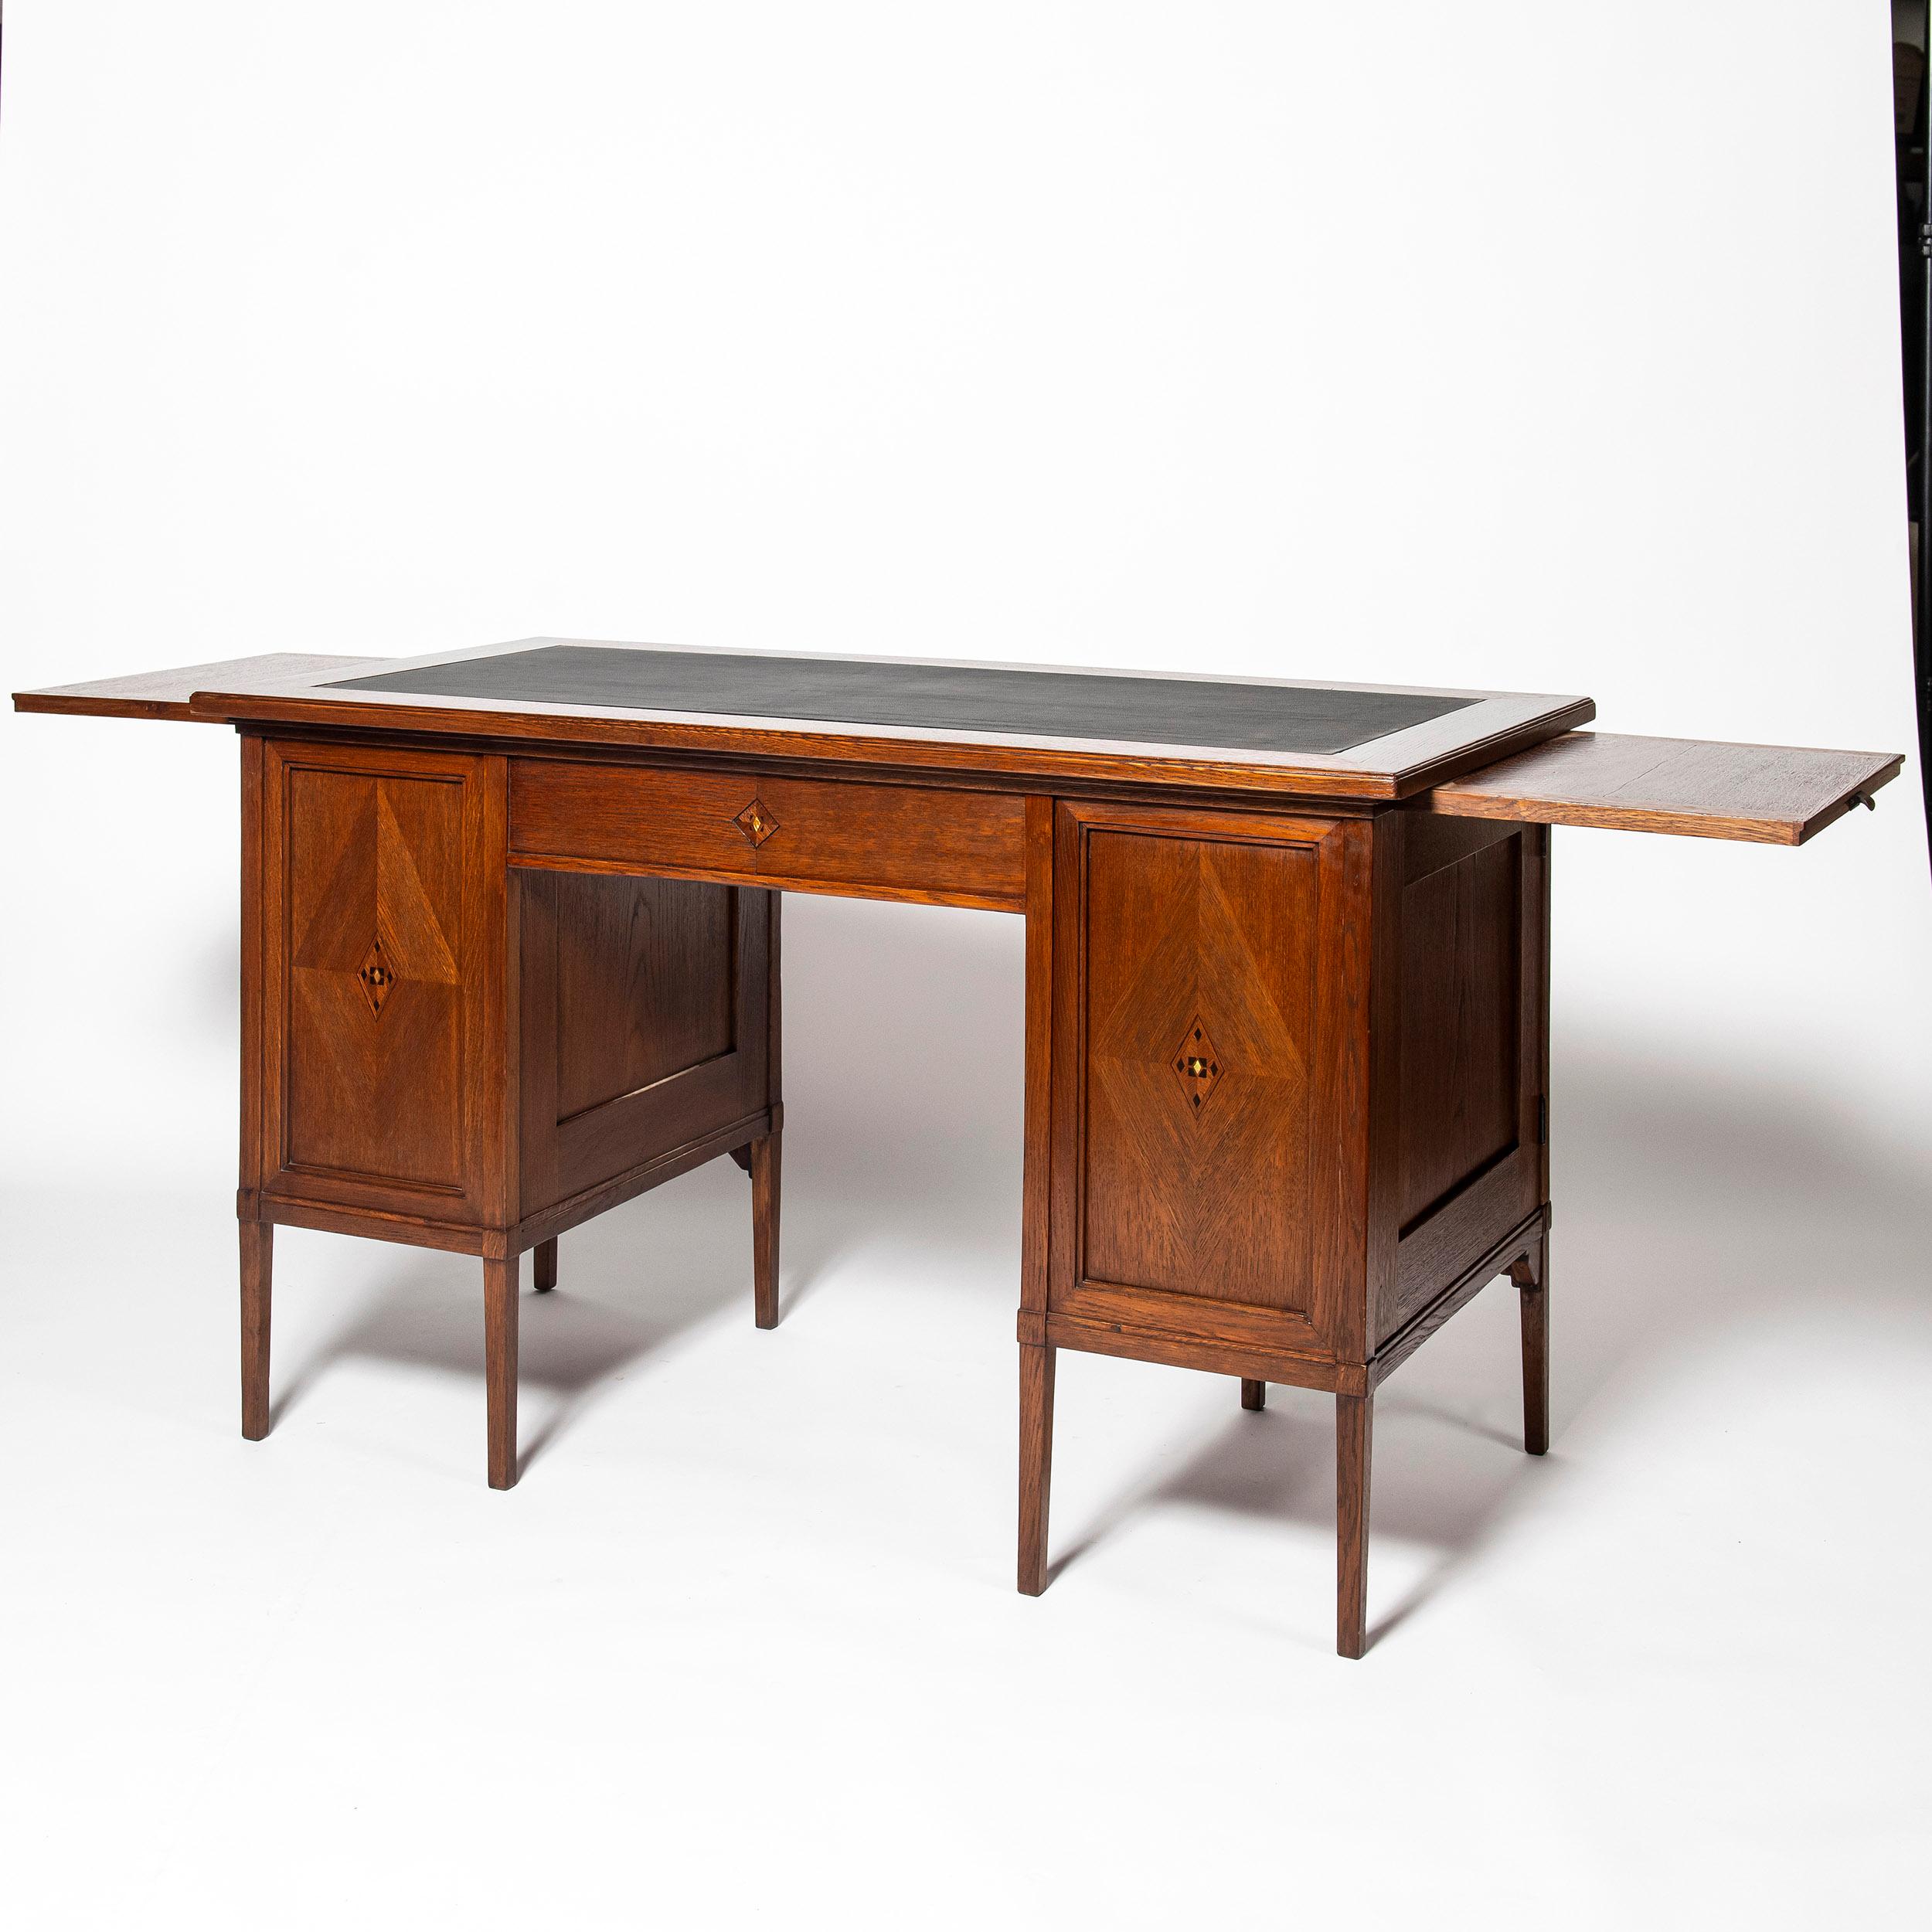 Oak wood, iron and leather desk. Scotland, early 20th century.
With wood marquetry.
Arts & Crafts period.